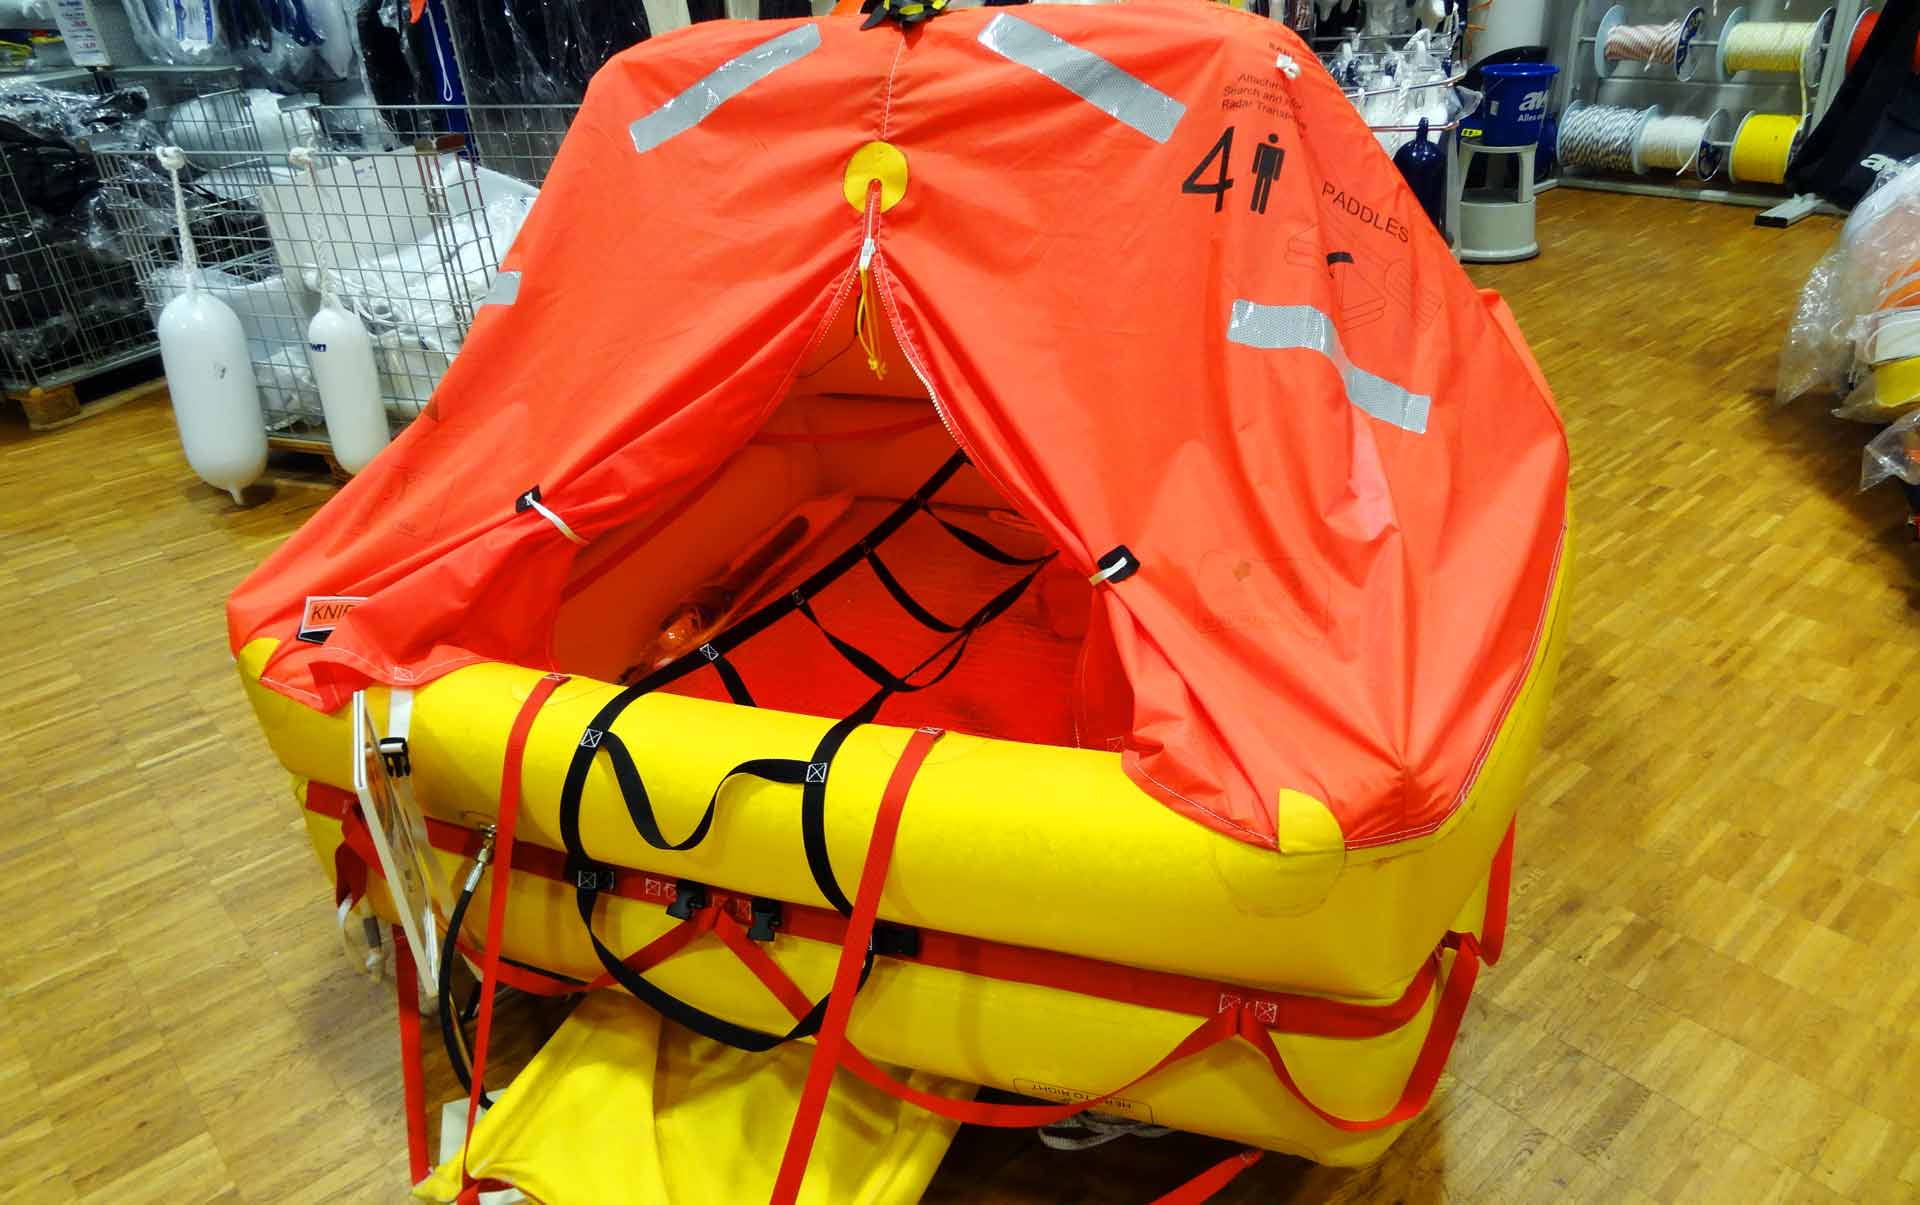 That´s a 4 person life raft